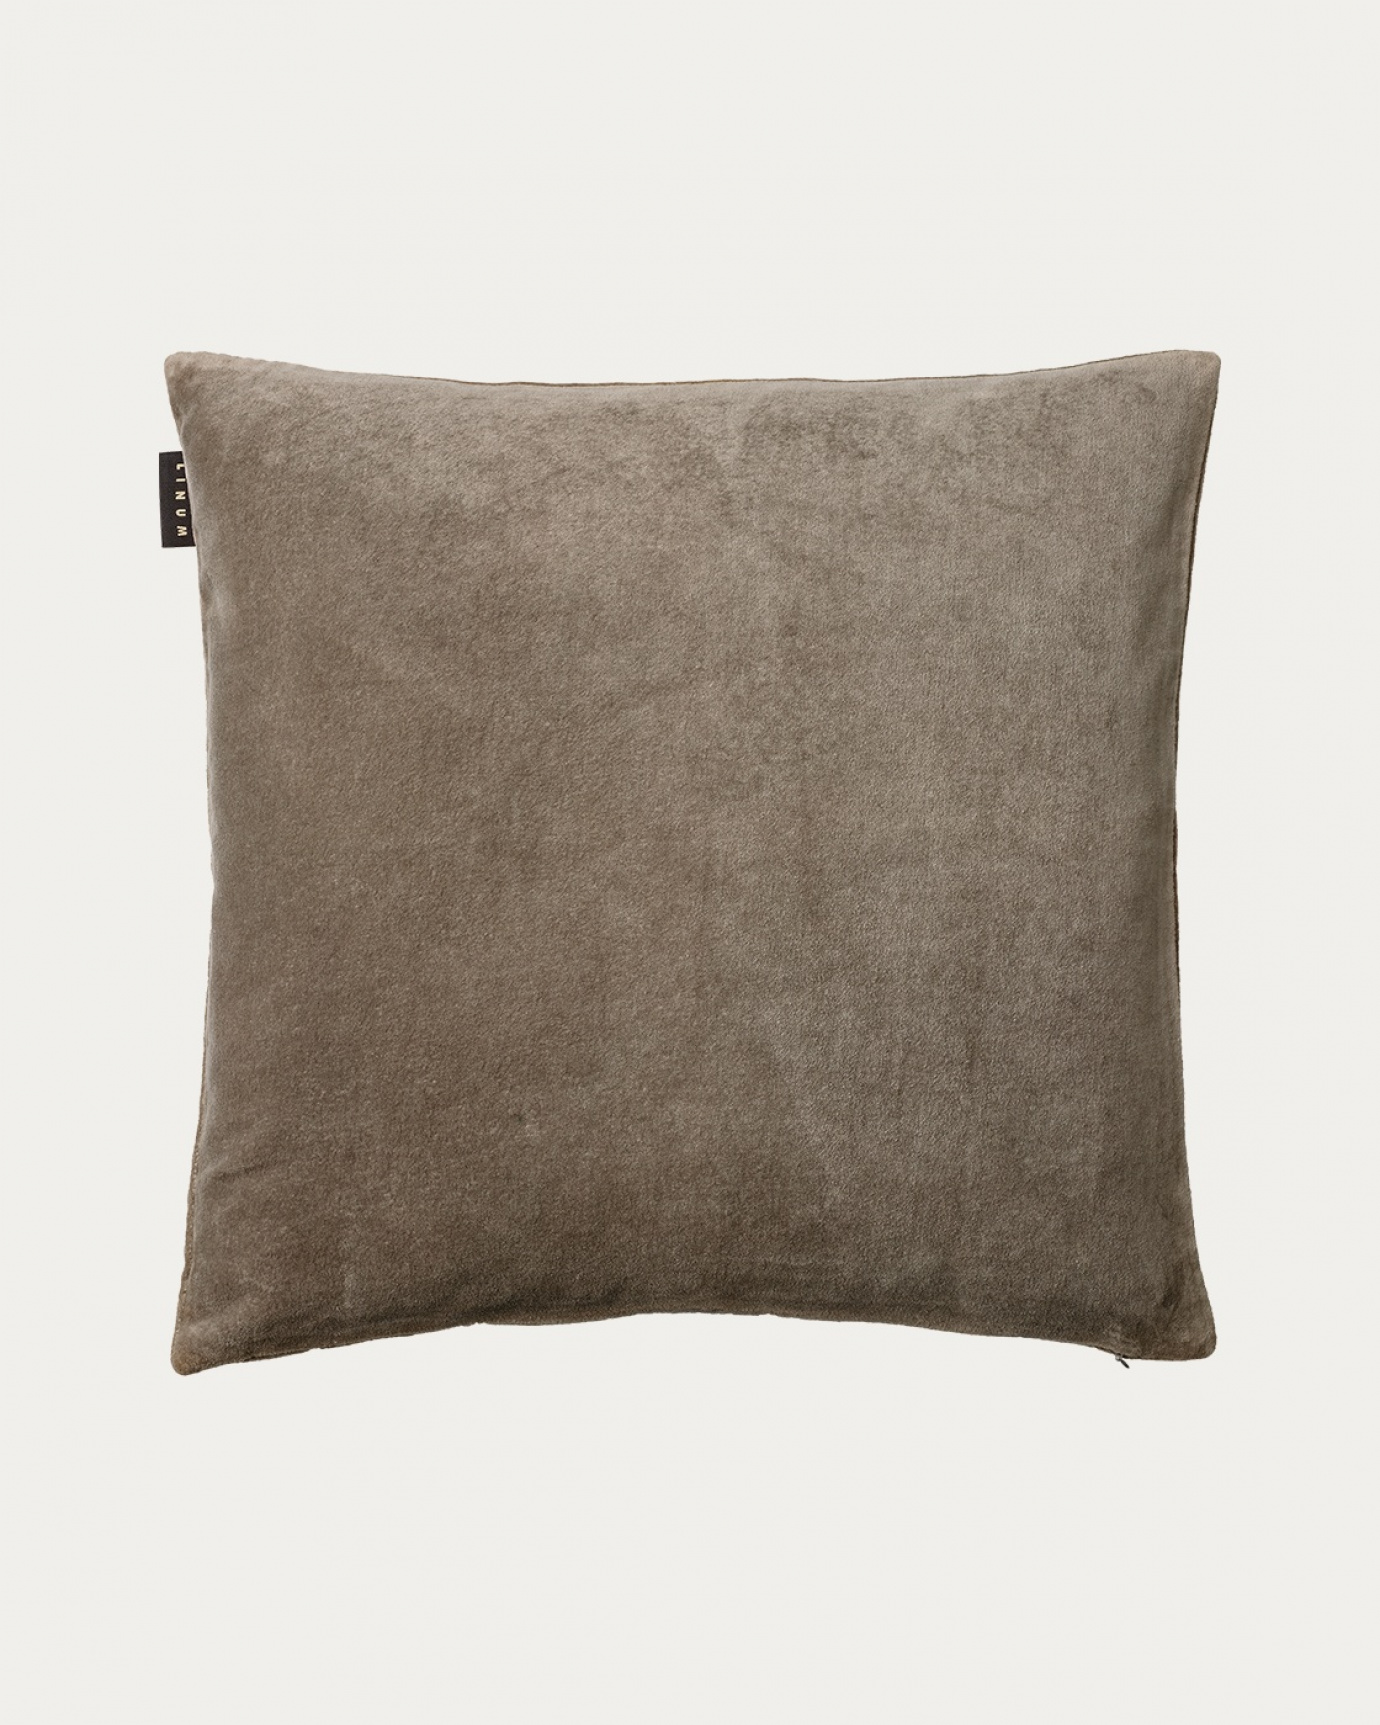 Product image mole brown PAOLO cushion cover in soft cotton velvet from LINUM DESIGN. Size 50x50 cm.